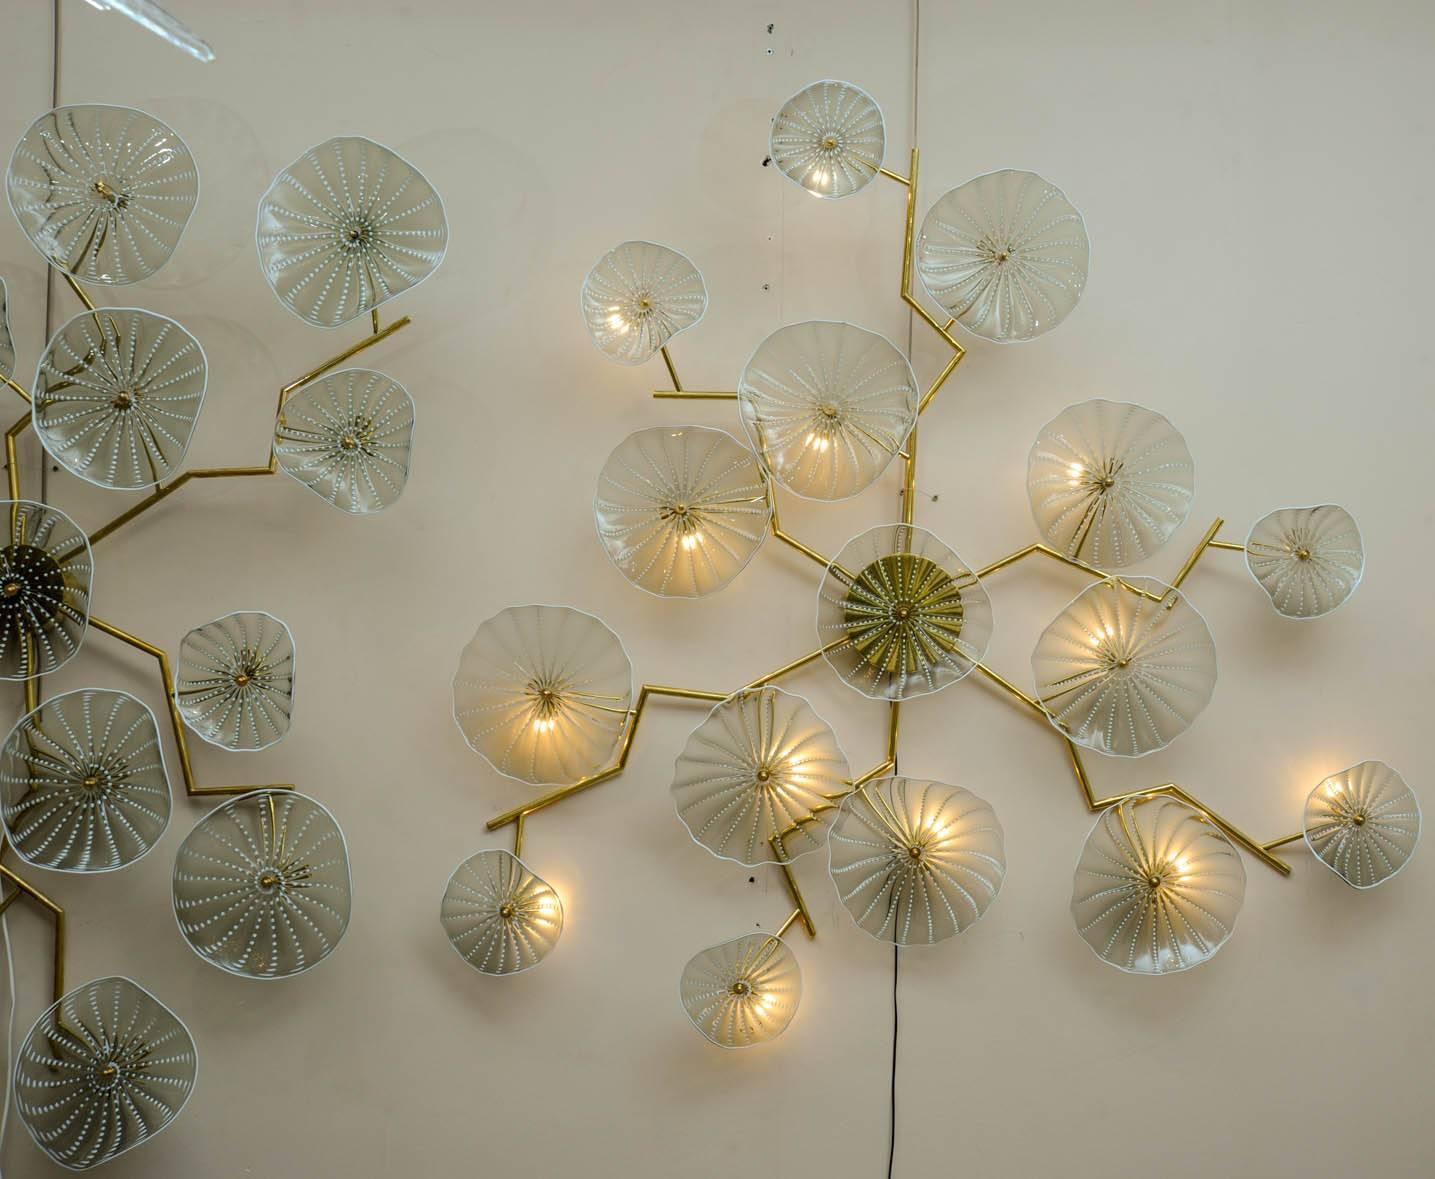 Great wall lamp in brass, 15 lights in shape of flowers in Venetian glass. A pair is available.